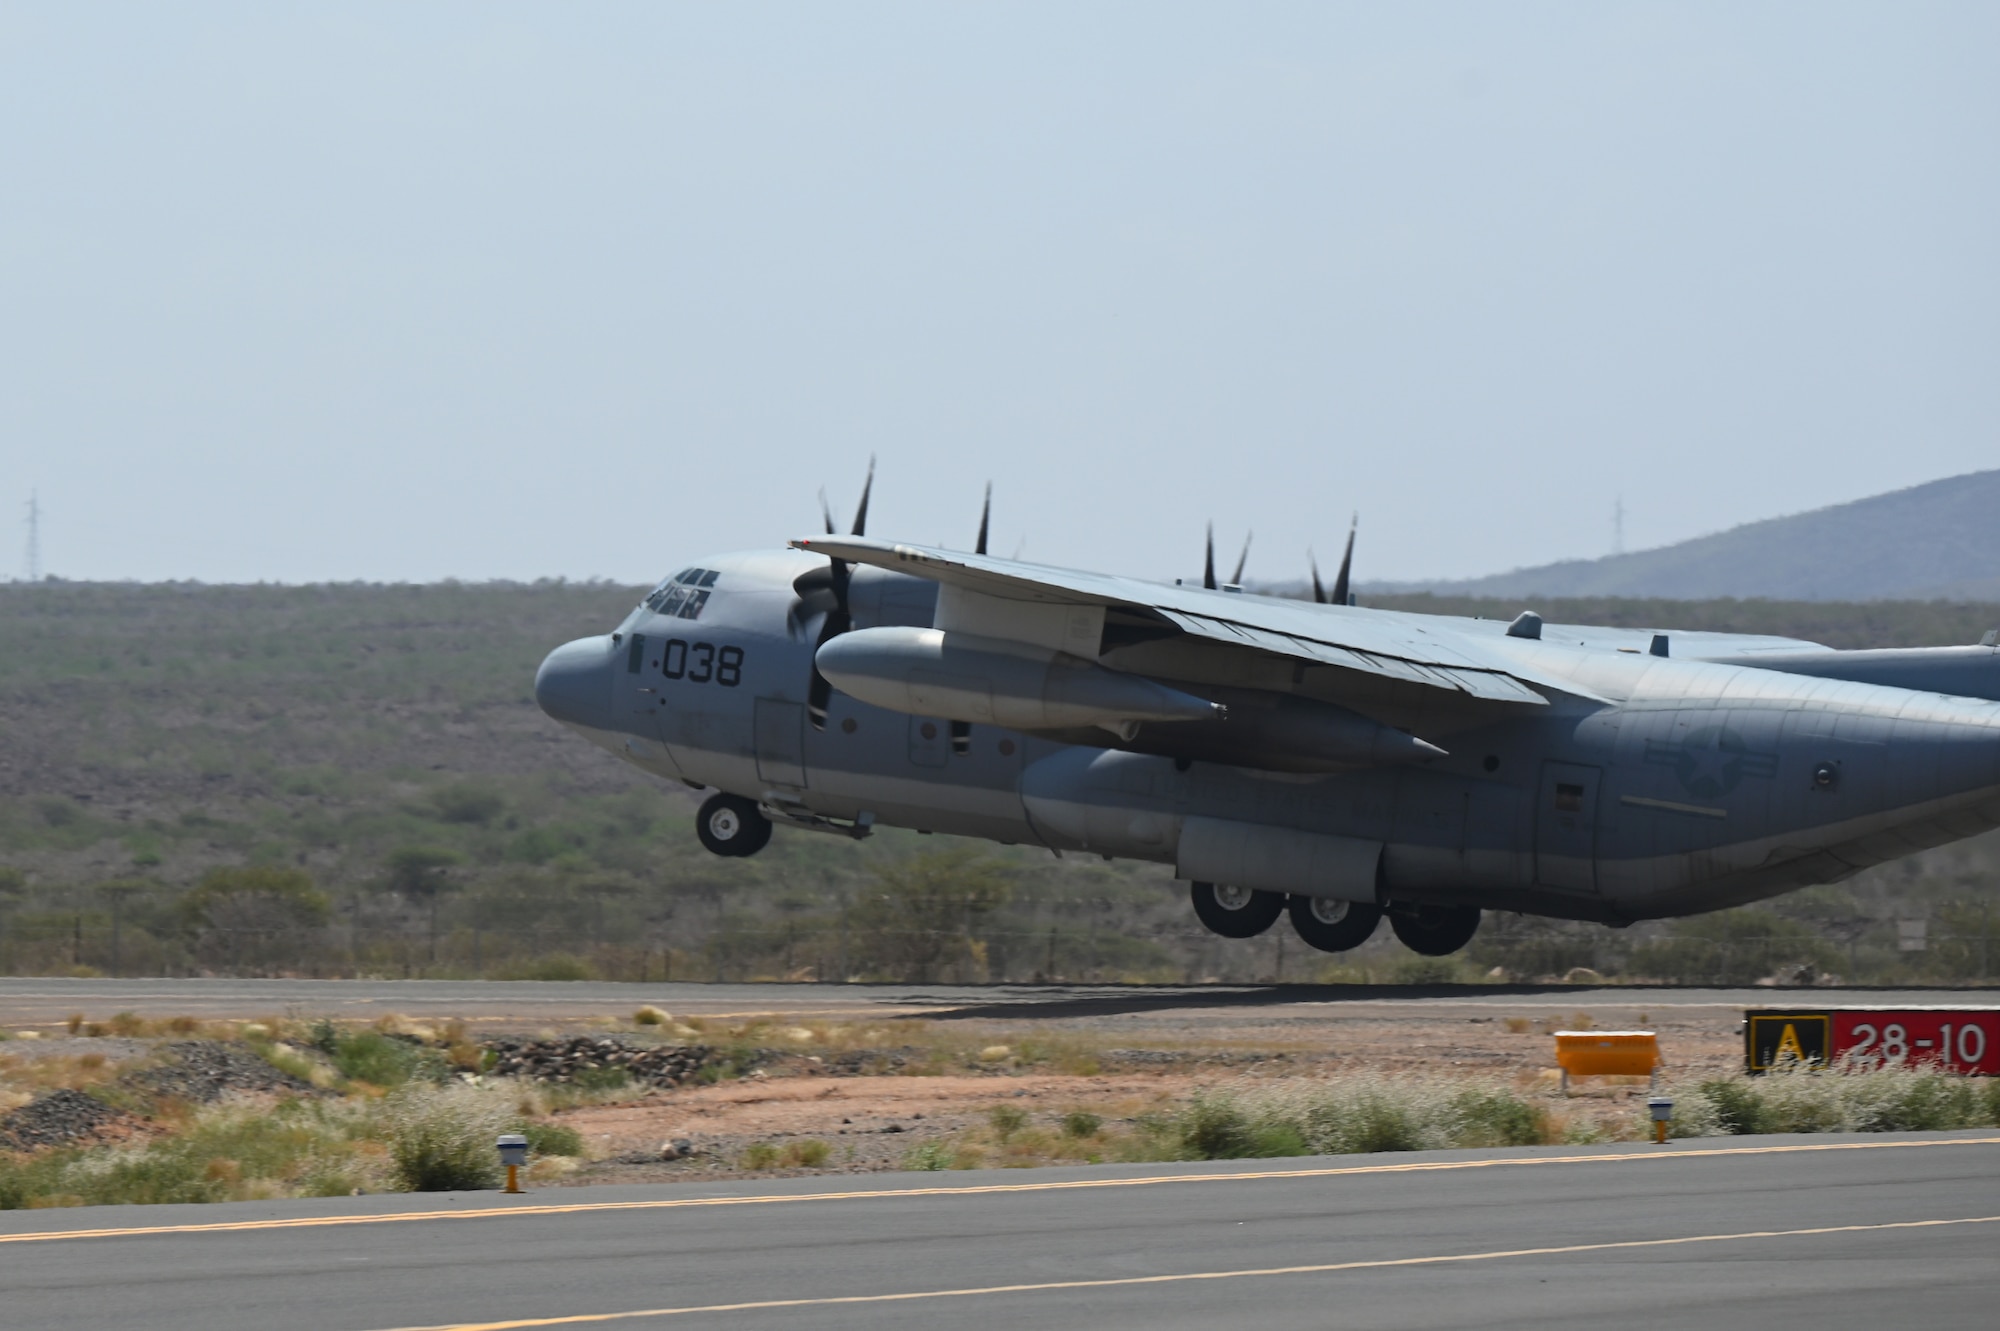 A U.S. Marine Corps KC-130J takes off in support of a simulated Forward Arming and Refueling Point (FARP) exercise at Chabelley Airfield, Djibouti, Feb. 22, 2023. The ability of a Joint Force Commander to move their forces fluidly across the theater to seize, retain and utilize initiatives against an adversary is key to ensuring readiness and resilience, and protecting assets and personnel. (U.S. Air Force photo by Tech. Sgt. Jayson Burns)